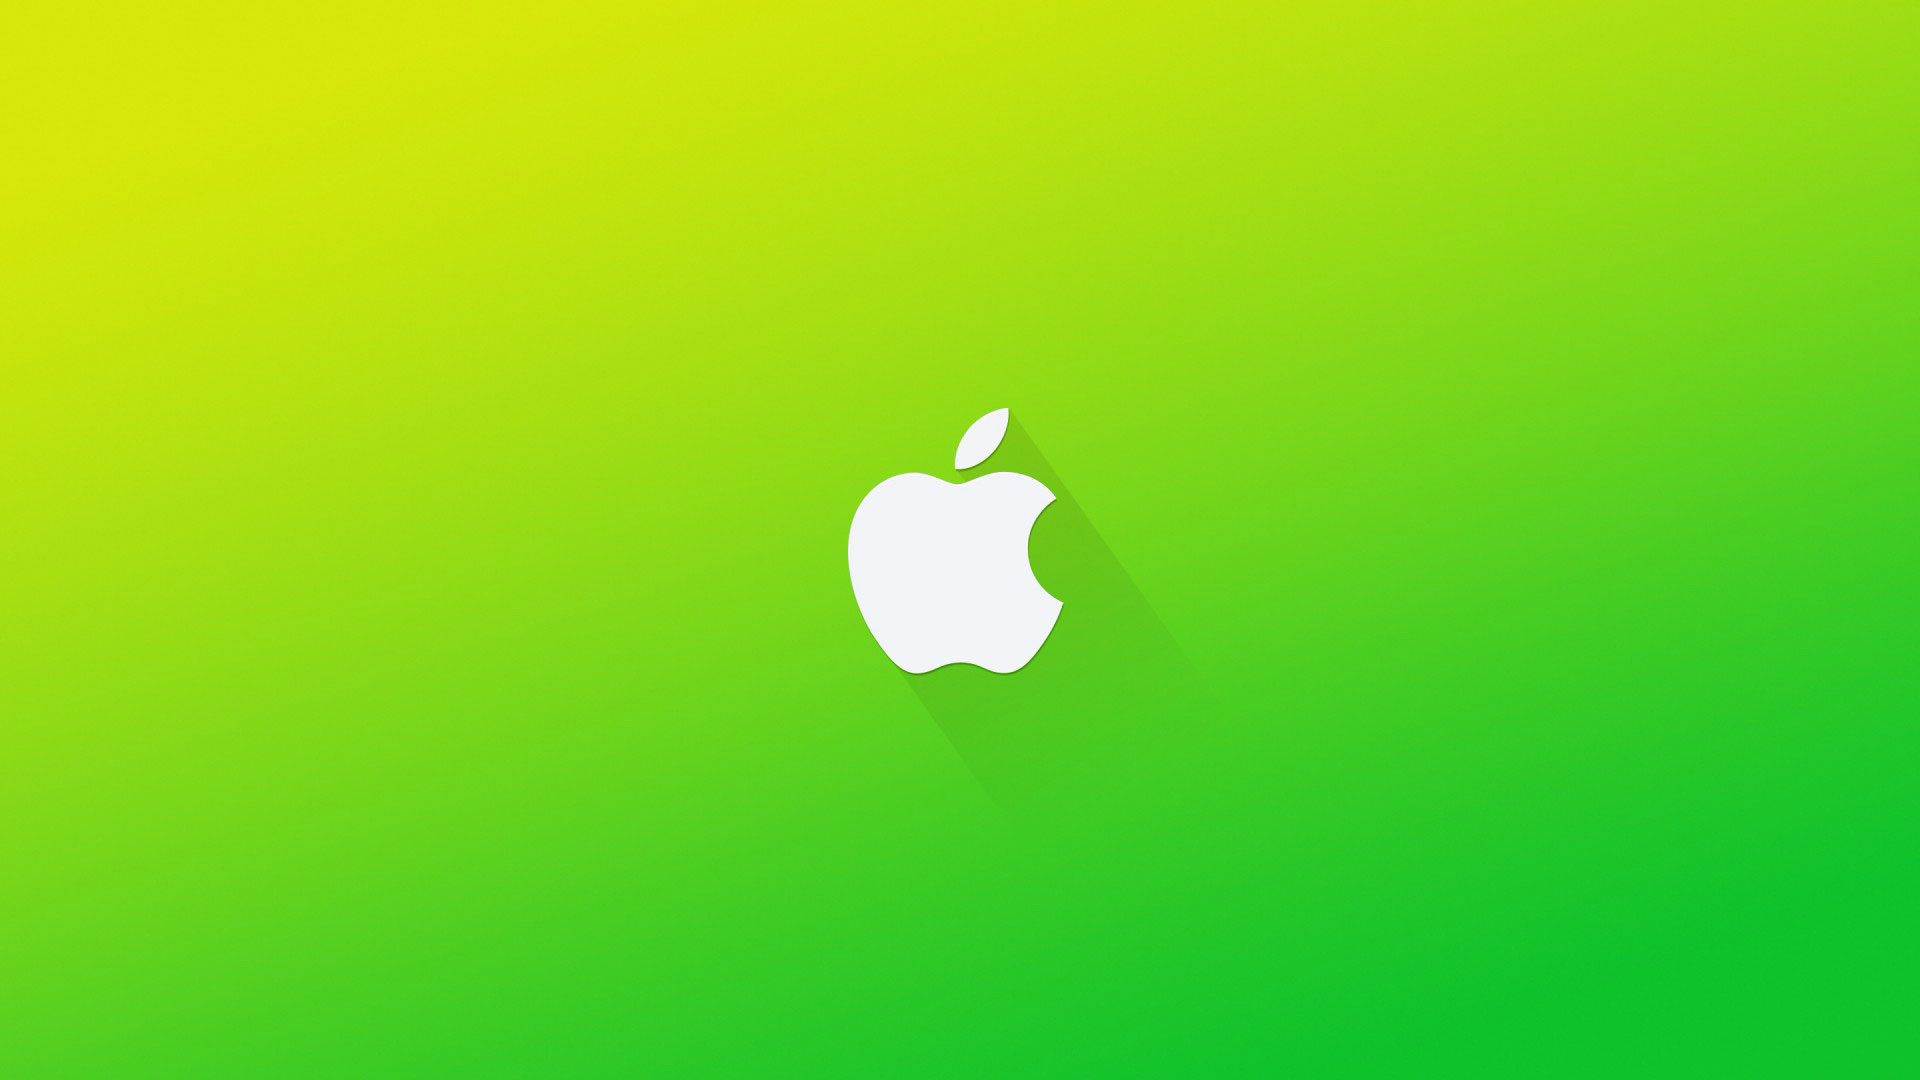 1920x1080 hd pics photos attractive white apple logo in green background hd quality  desktop background wallpaper